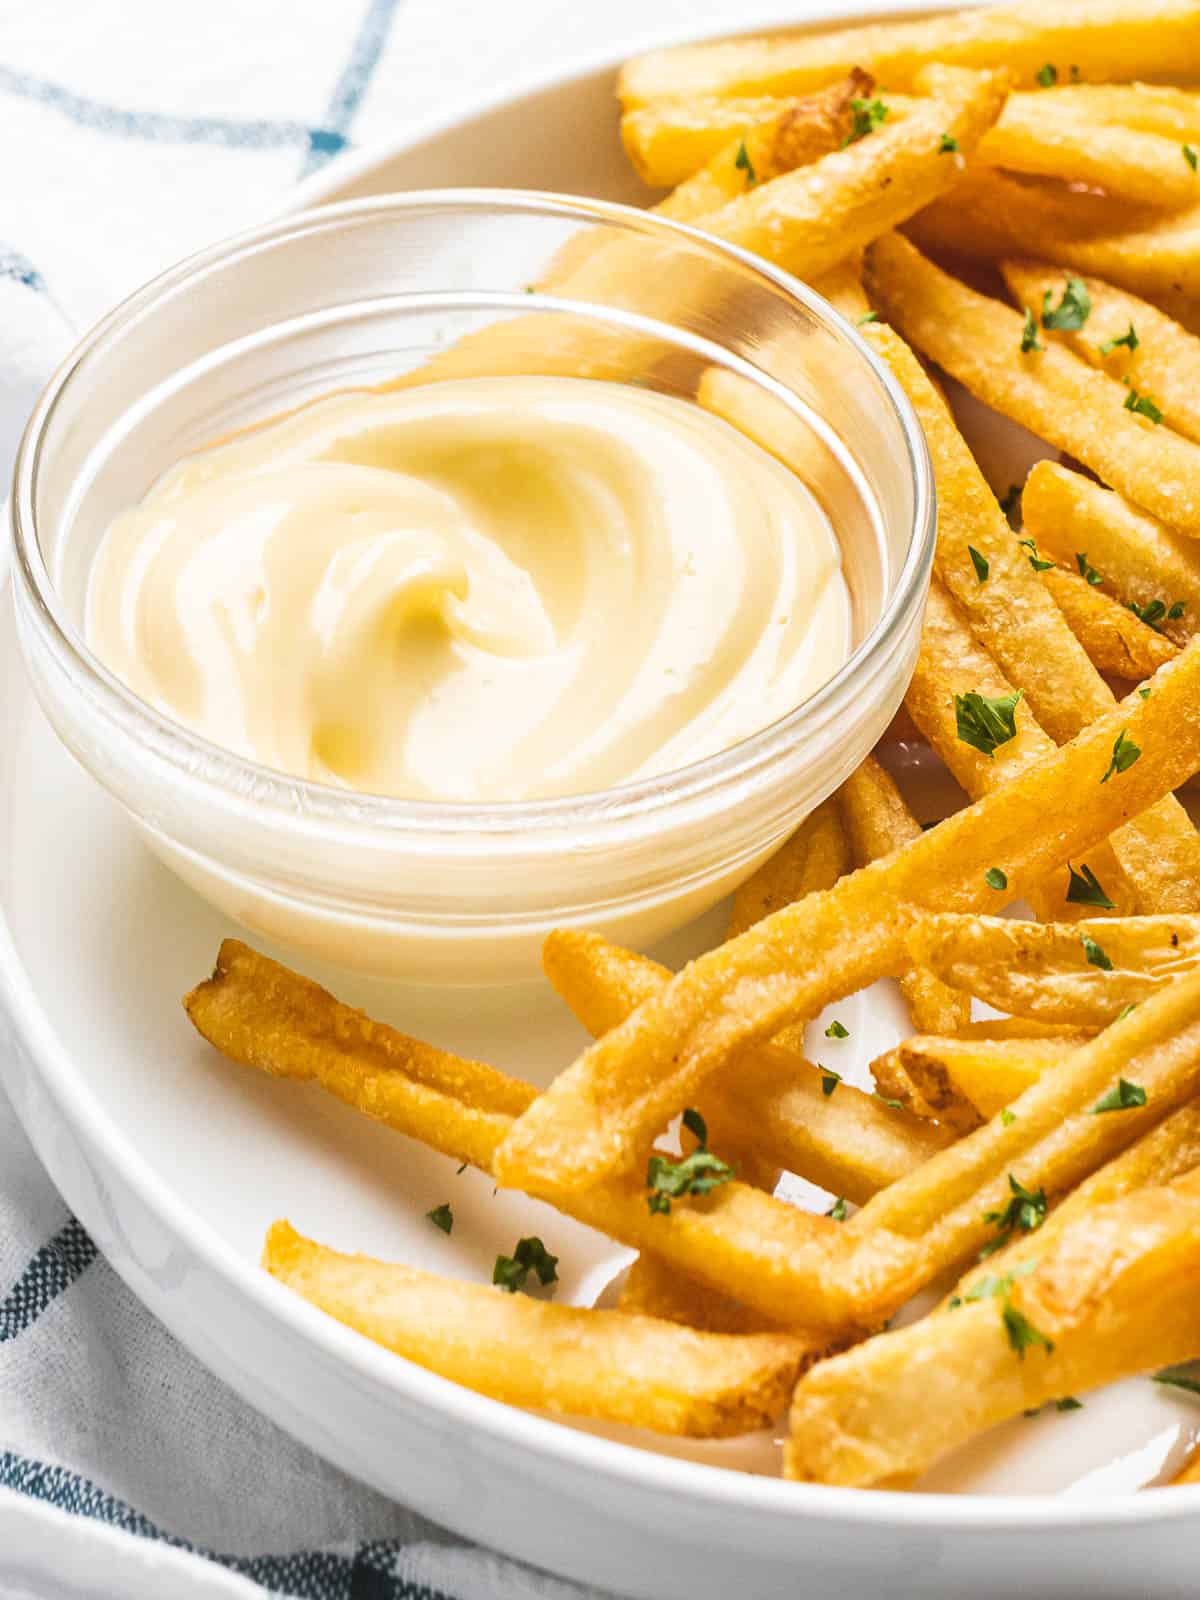 Easy garlic aioli sauce in a bowl next to French fries.